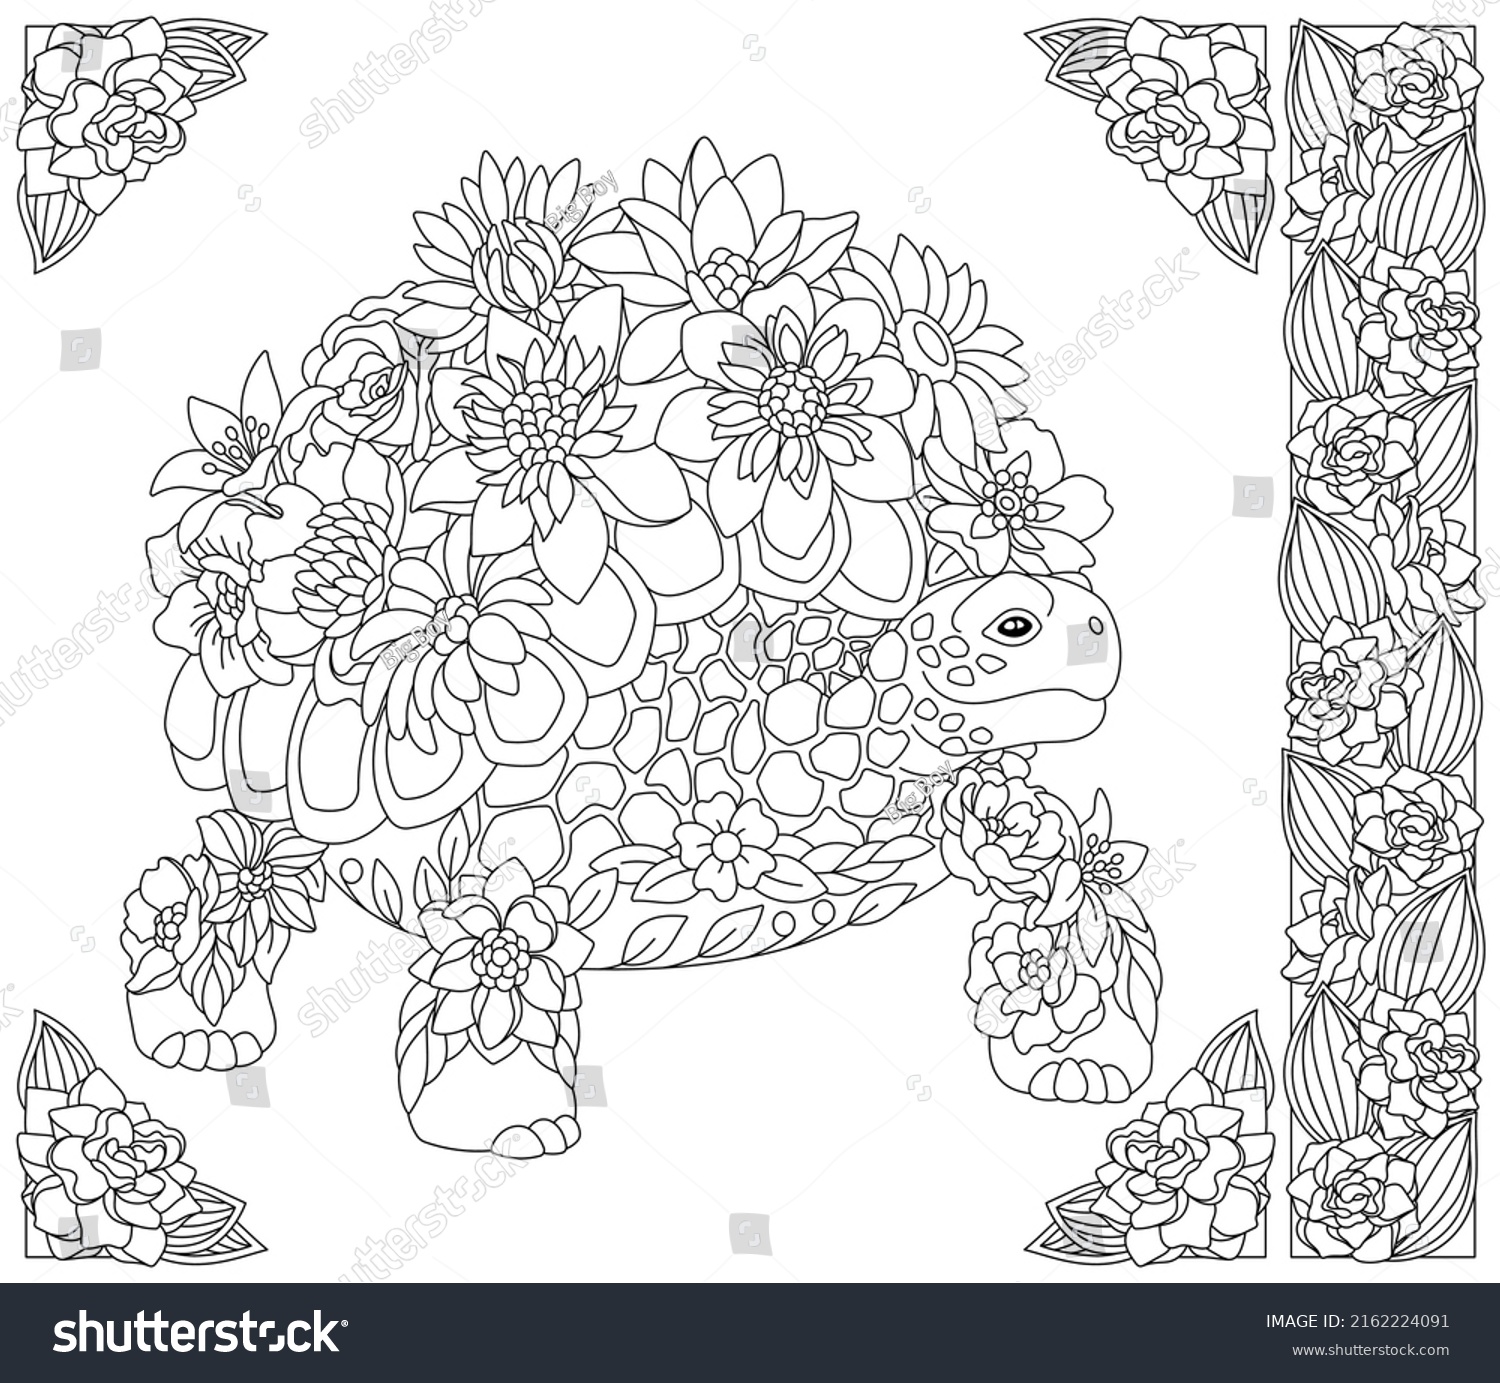 SVG of Adult coloring book page. Floral turtle. Ethereal animal consisting of flowers and leaves svg